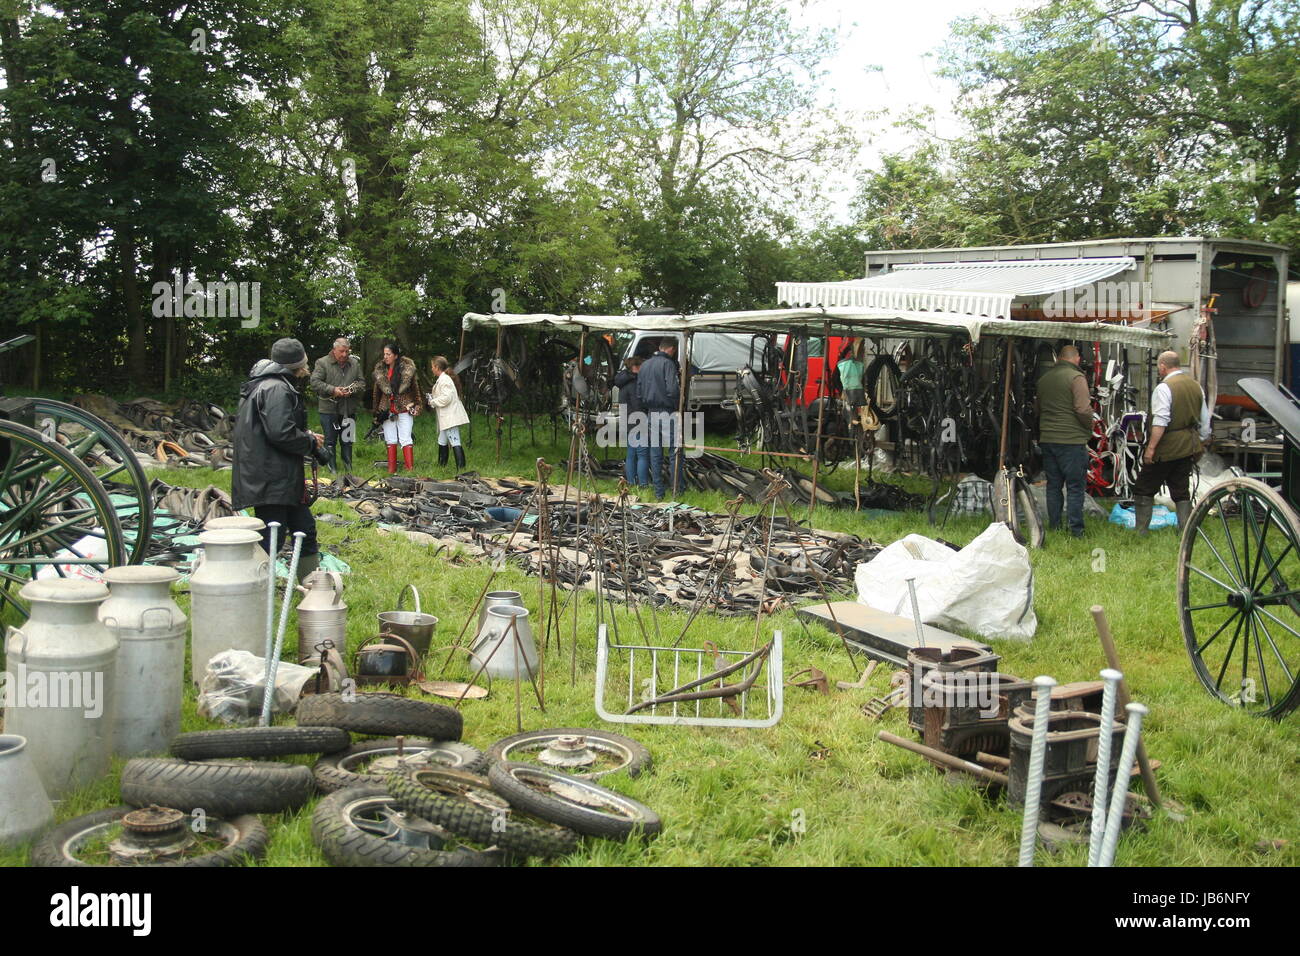 Appleby, Cumbria, UK. 9th June, 2017. A stall selling horse tack, part of a large market at the Appleby Horse Fair. The Appleby Horse Fair is one of Europes largest gatherings of people from Gypsy and Traveller communities. They come to trade horses and horse kit, it is also a major social event. Credit: Roland Ravenhill/Alamy Live News Stock Photo